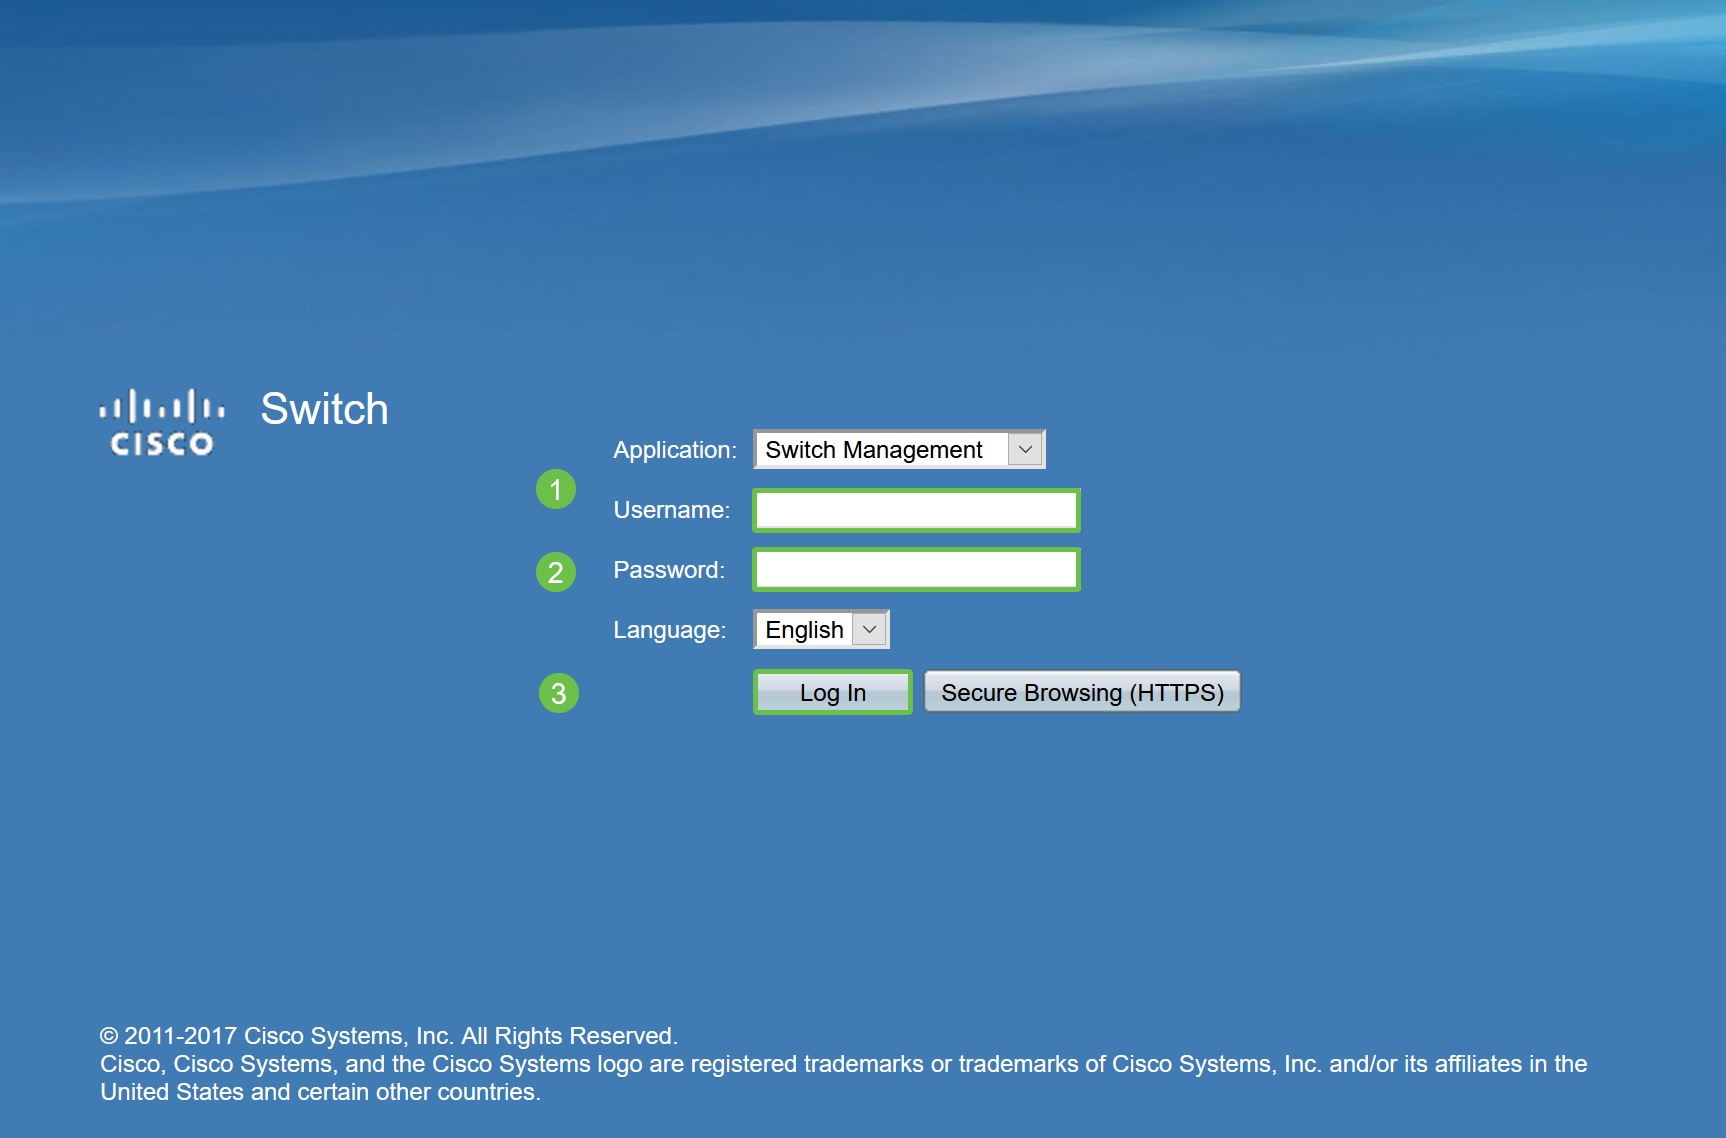 This image shows the login page for the switch. 